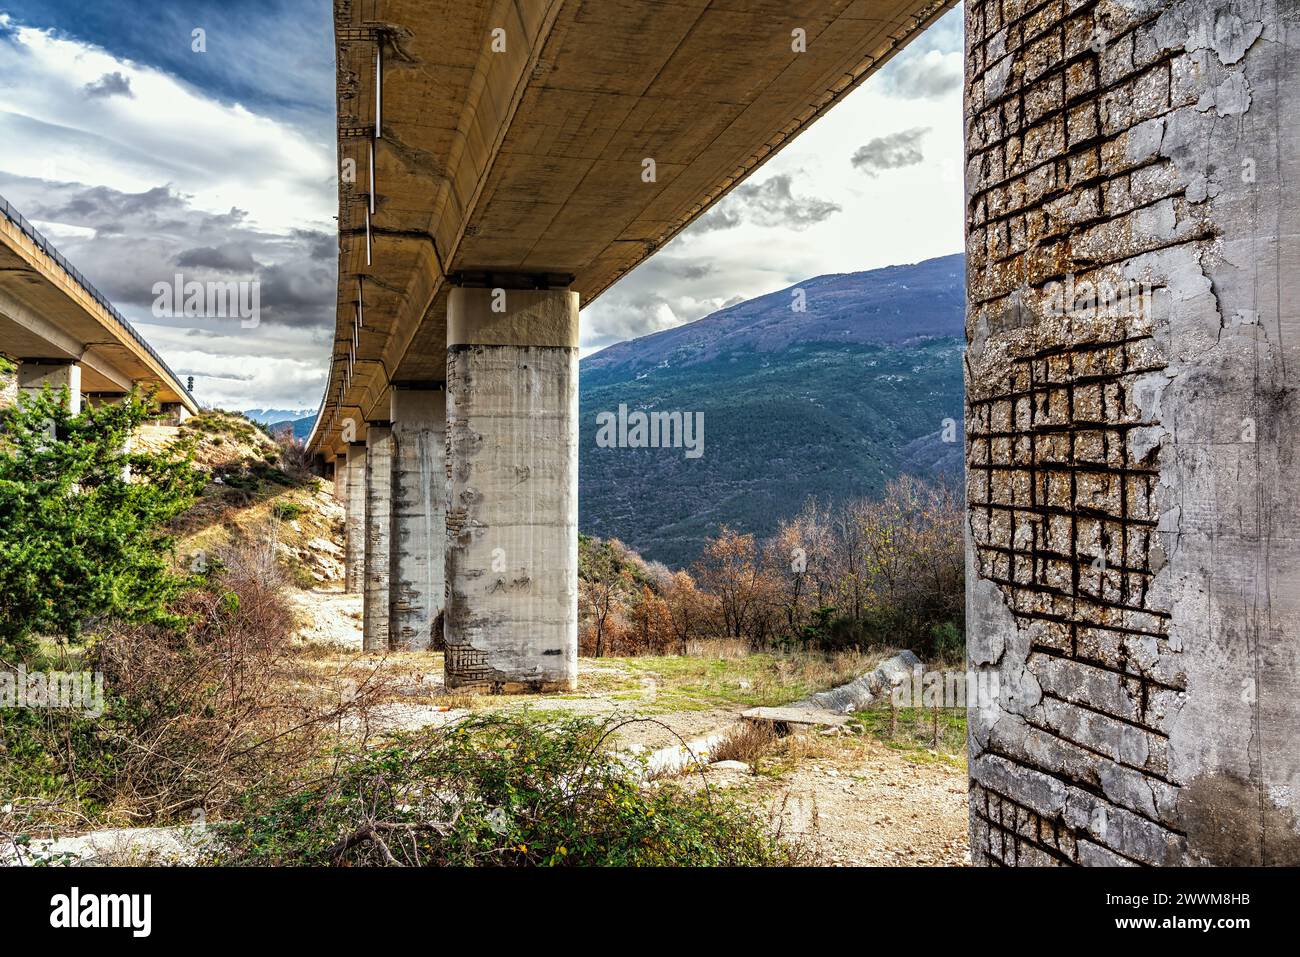 Deteriorated and worn highway pylons with exposed and rusted iron. Abruzzo, Italy, Europe Stock Photo